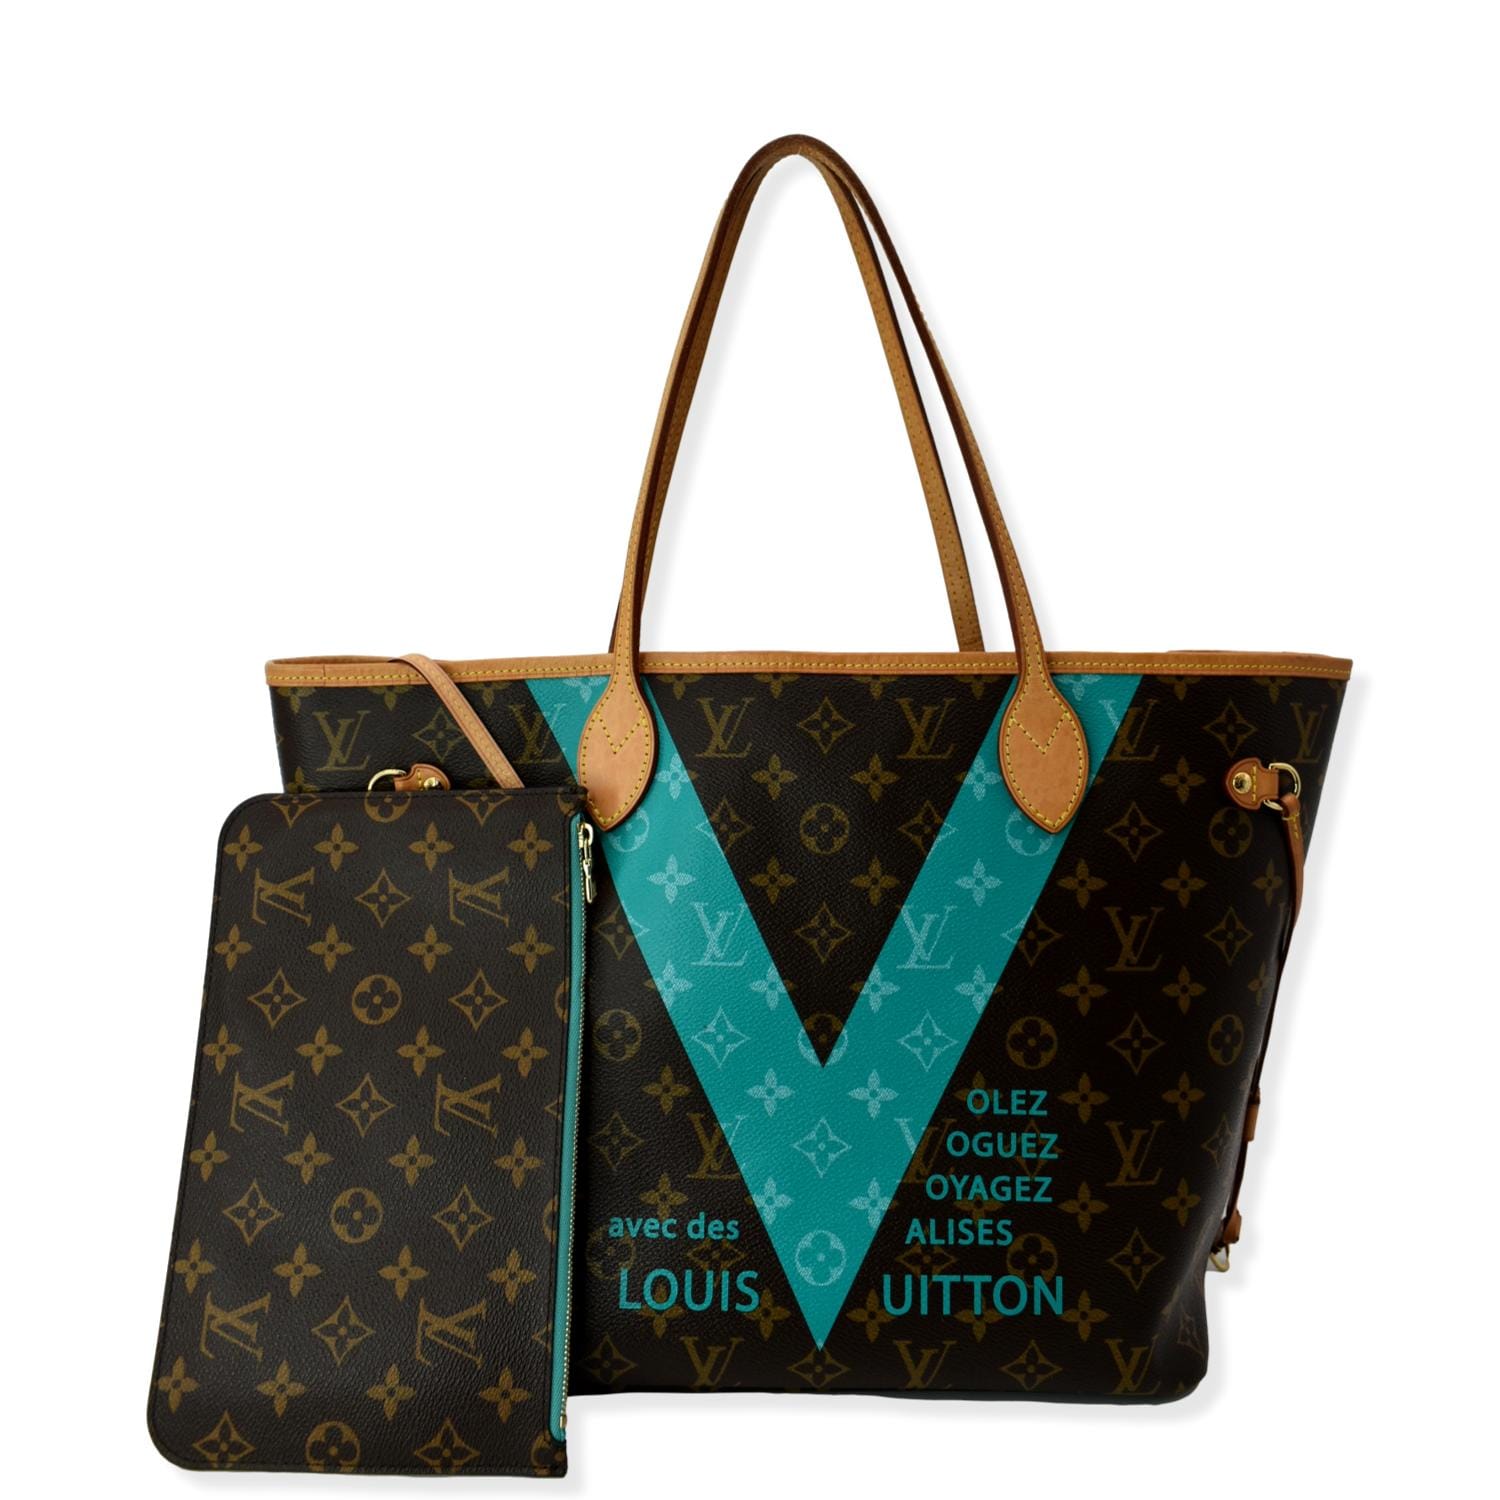 Unboxing- Louis Vuitton Neverfull MM - Limited Edition Tahitienne